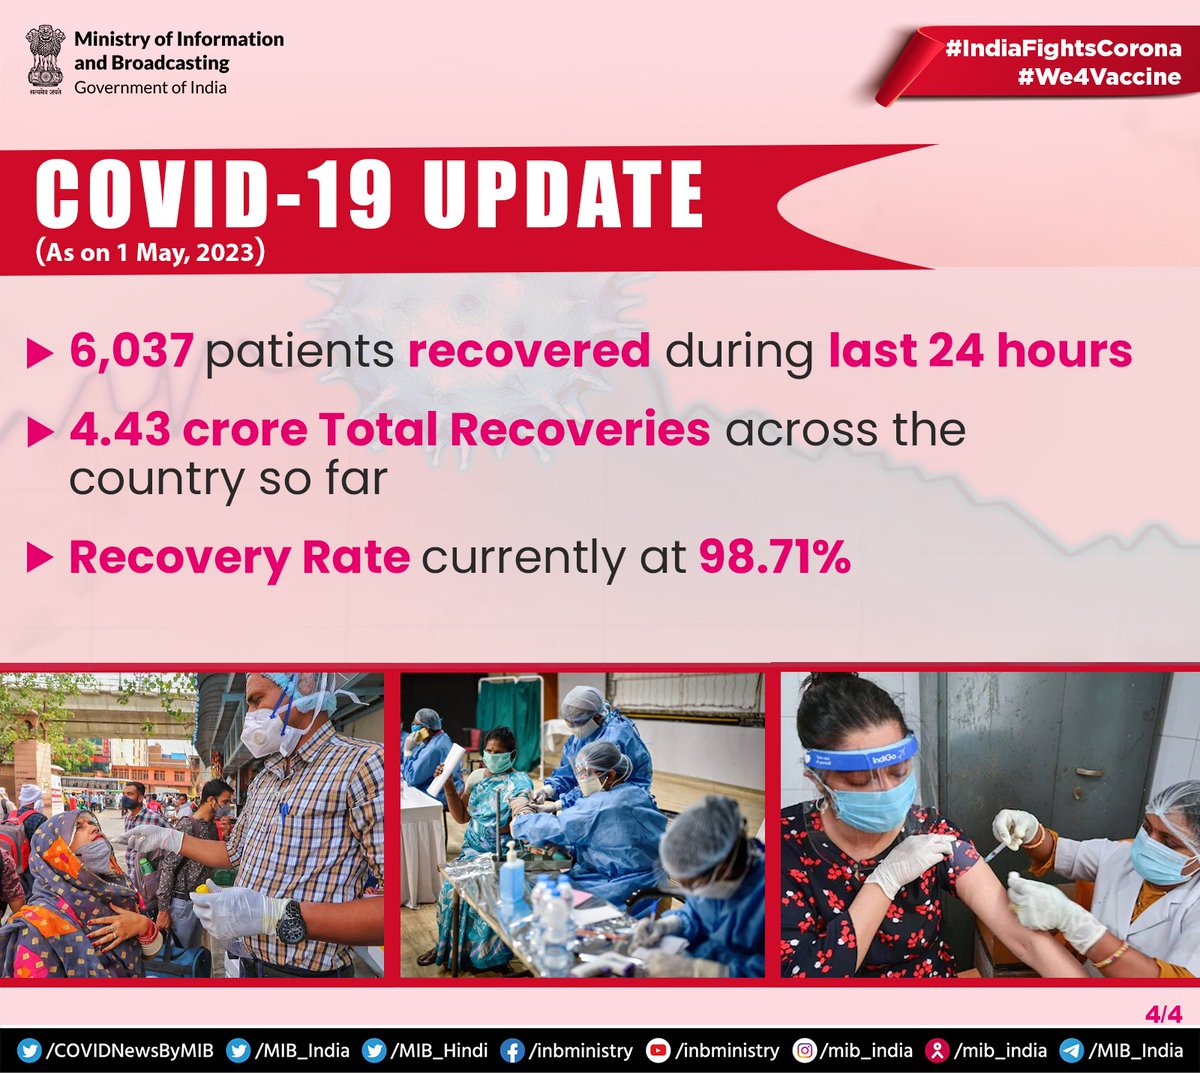 #IndiaFightsCorona:

#COVID19 UPDATE (As on 01st May, 2023)

➡️6,037 patients recovered during the last 24 hours

➡️4.43 crore total recoveries across the country so far

➡️Recovery rate currently at 98.71%

#Unite2FightCorona
#COVID19Update
#LargestVaccineDrive
#We4Vaccine